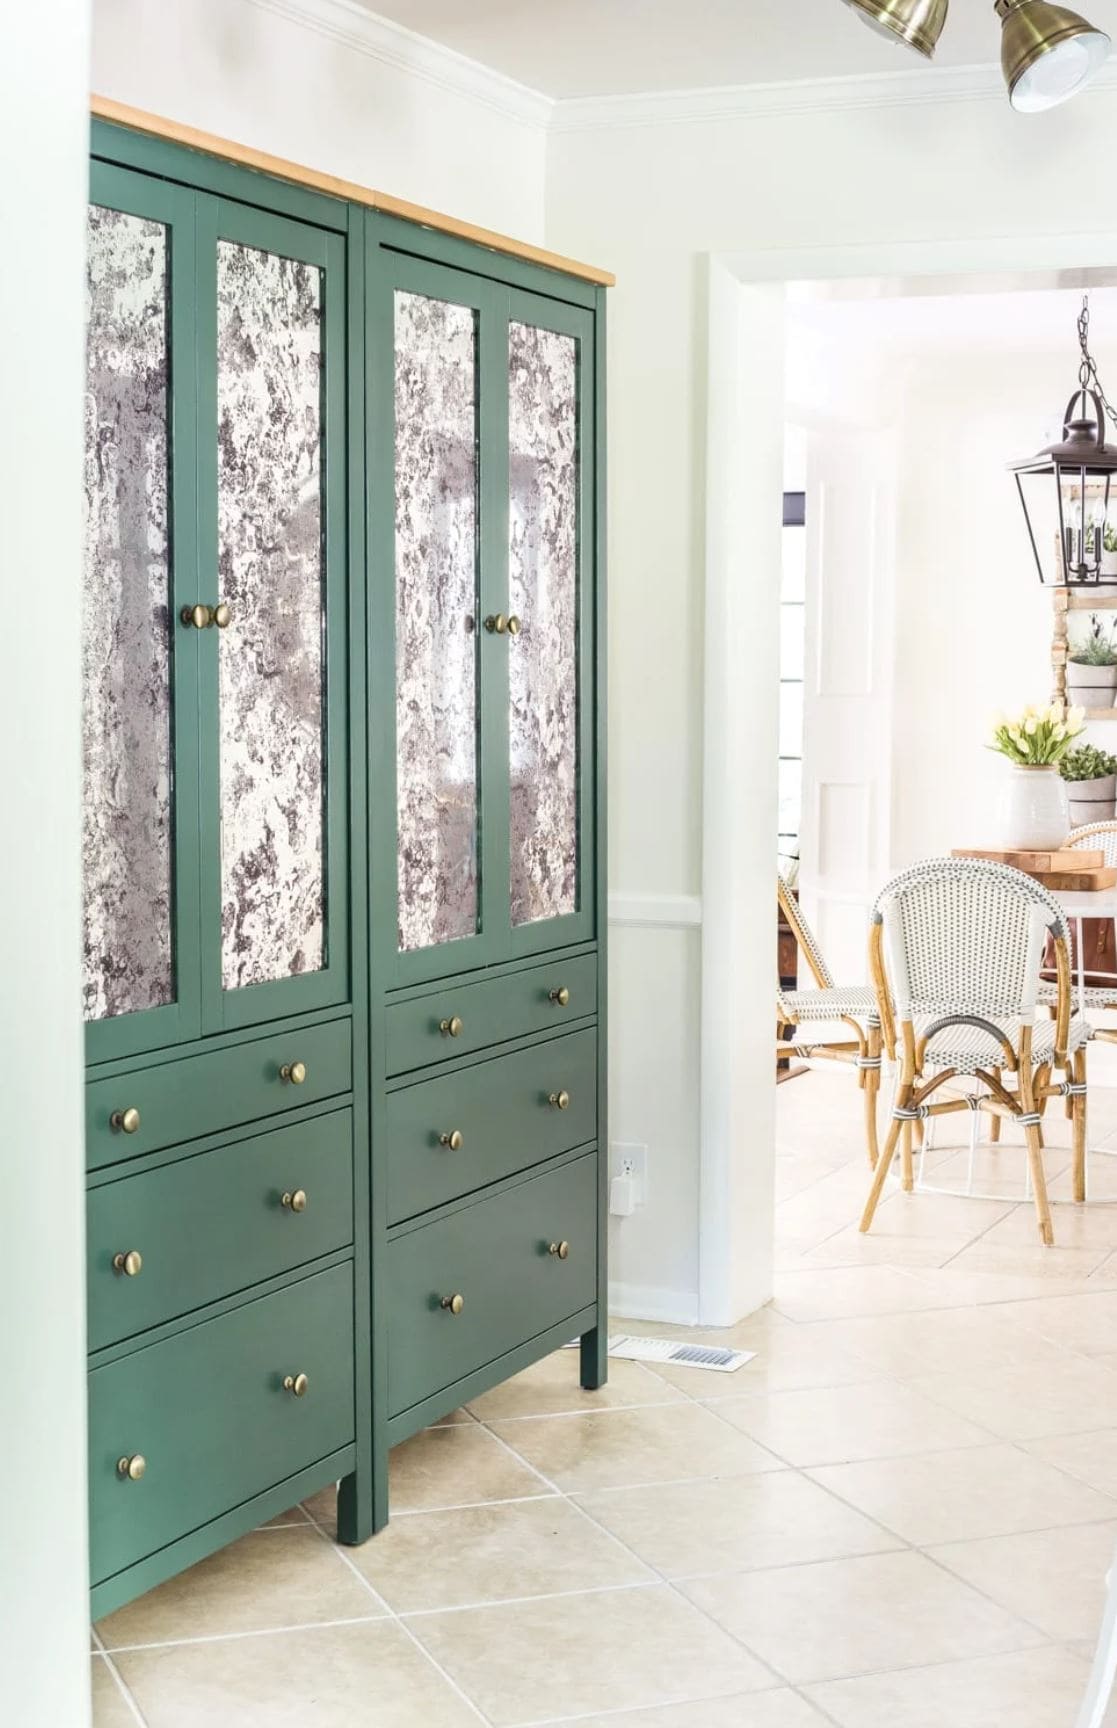 Two green HEMNES cabinets used as pantry storage with gold knobs and antique mirroring in the doors.